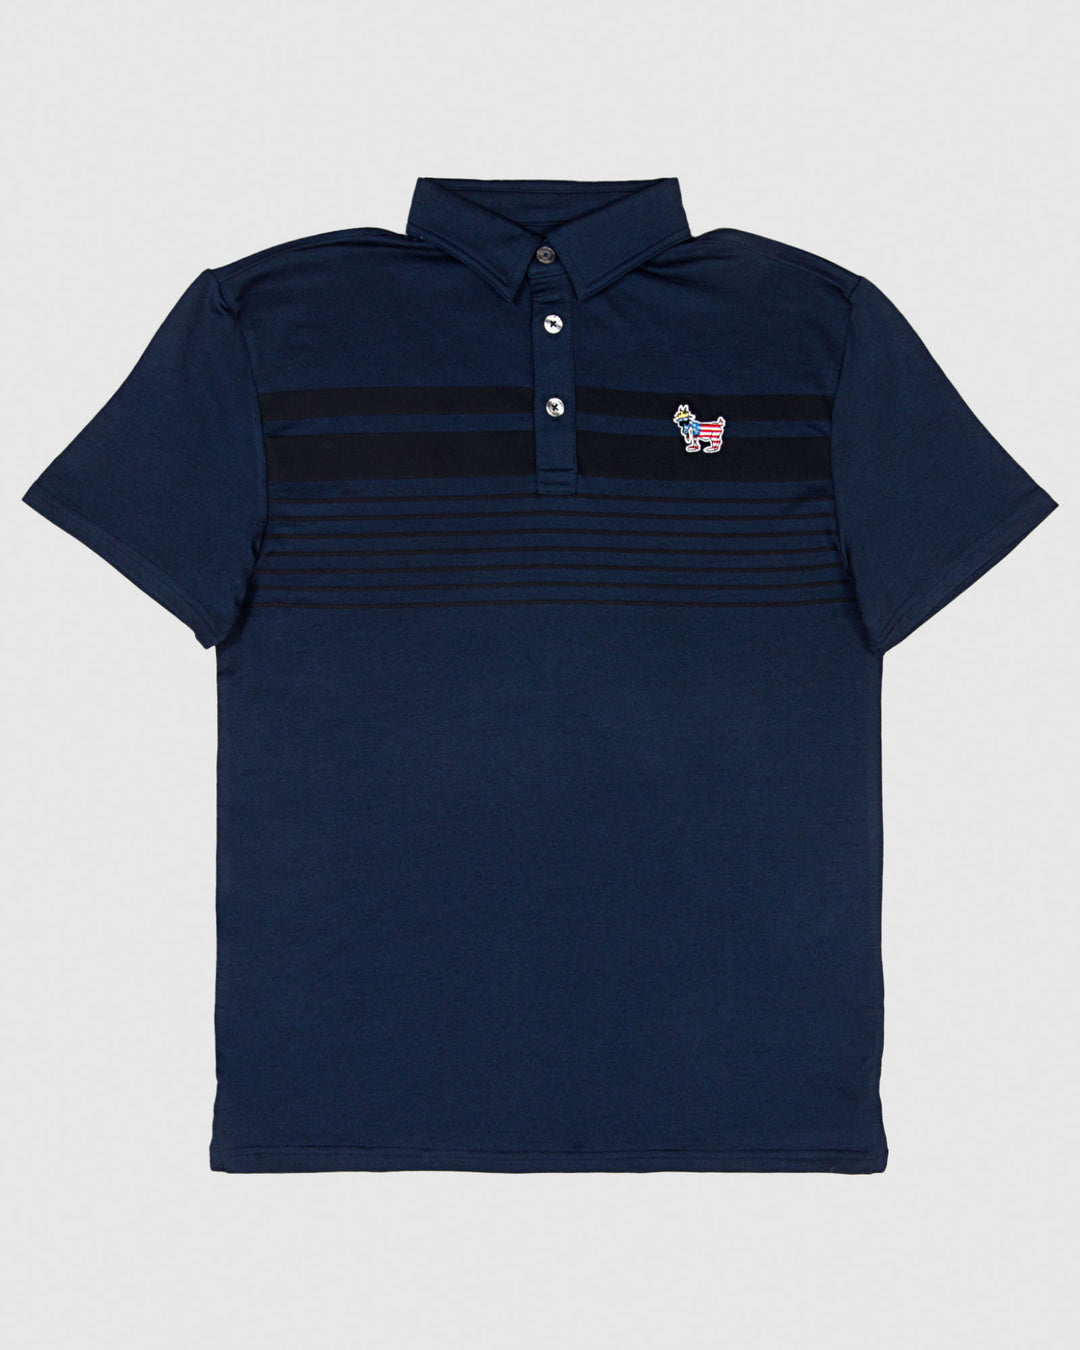 Navy polo with dark stripes and american flag goat